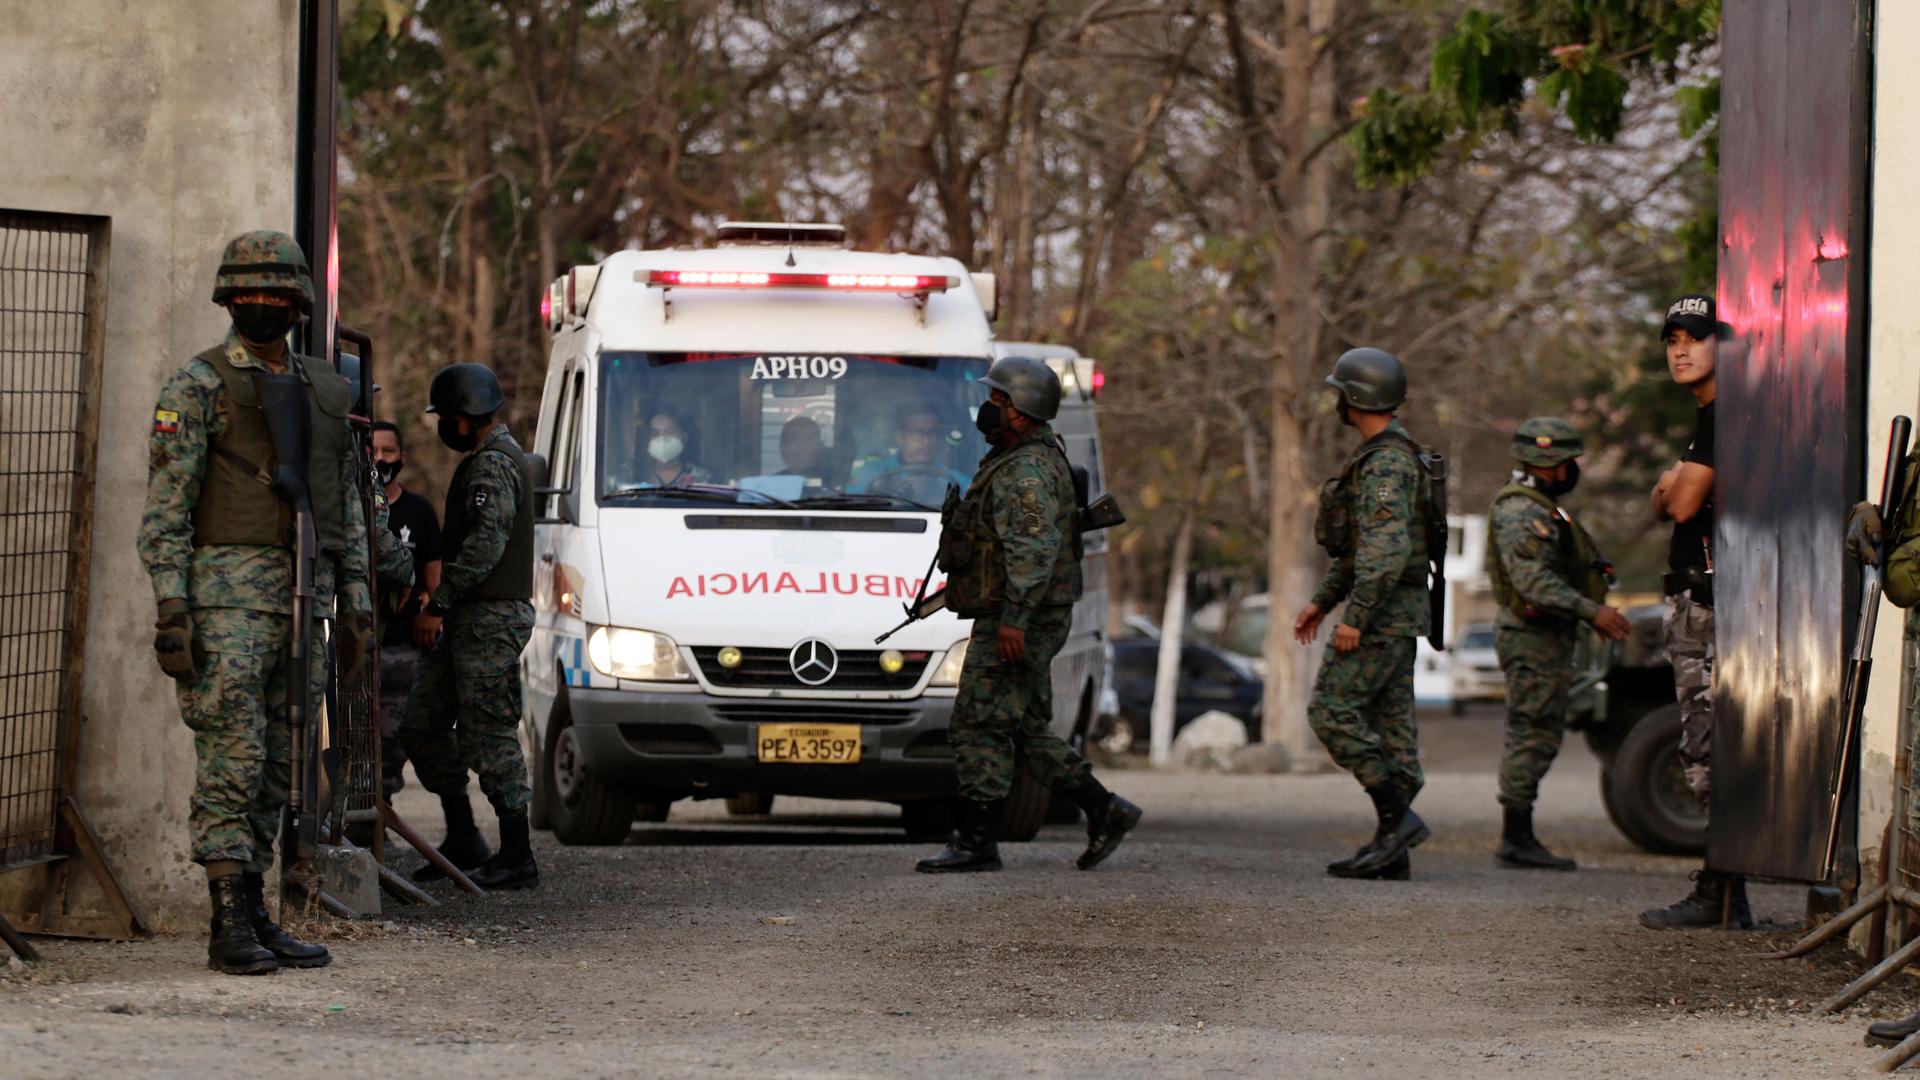 A white ambulance is shown from the front with several people wearing military fatigues and carrying weapons standing nearby.